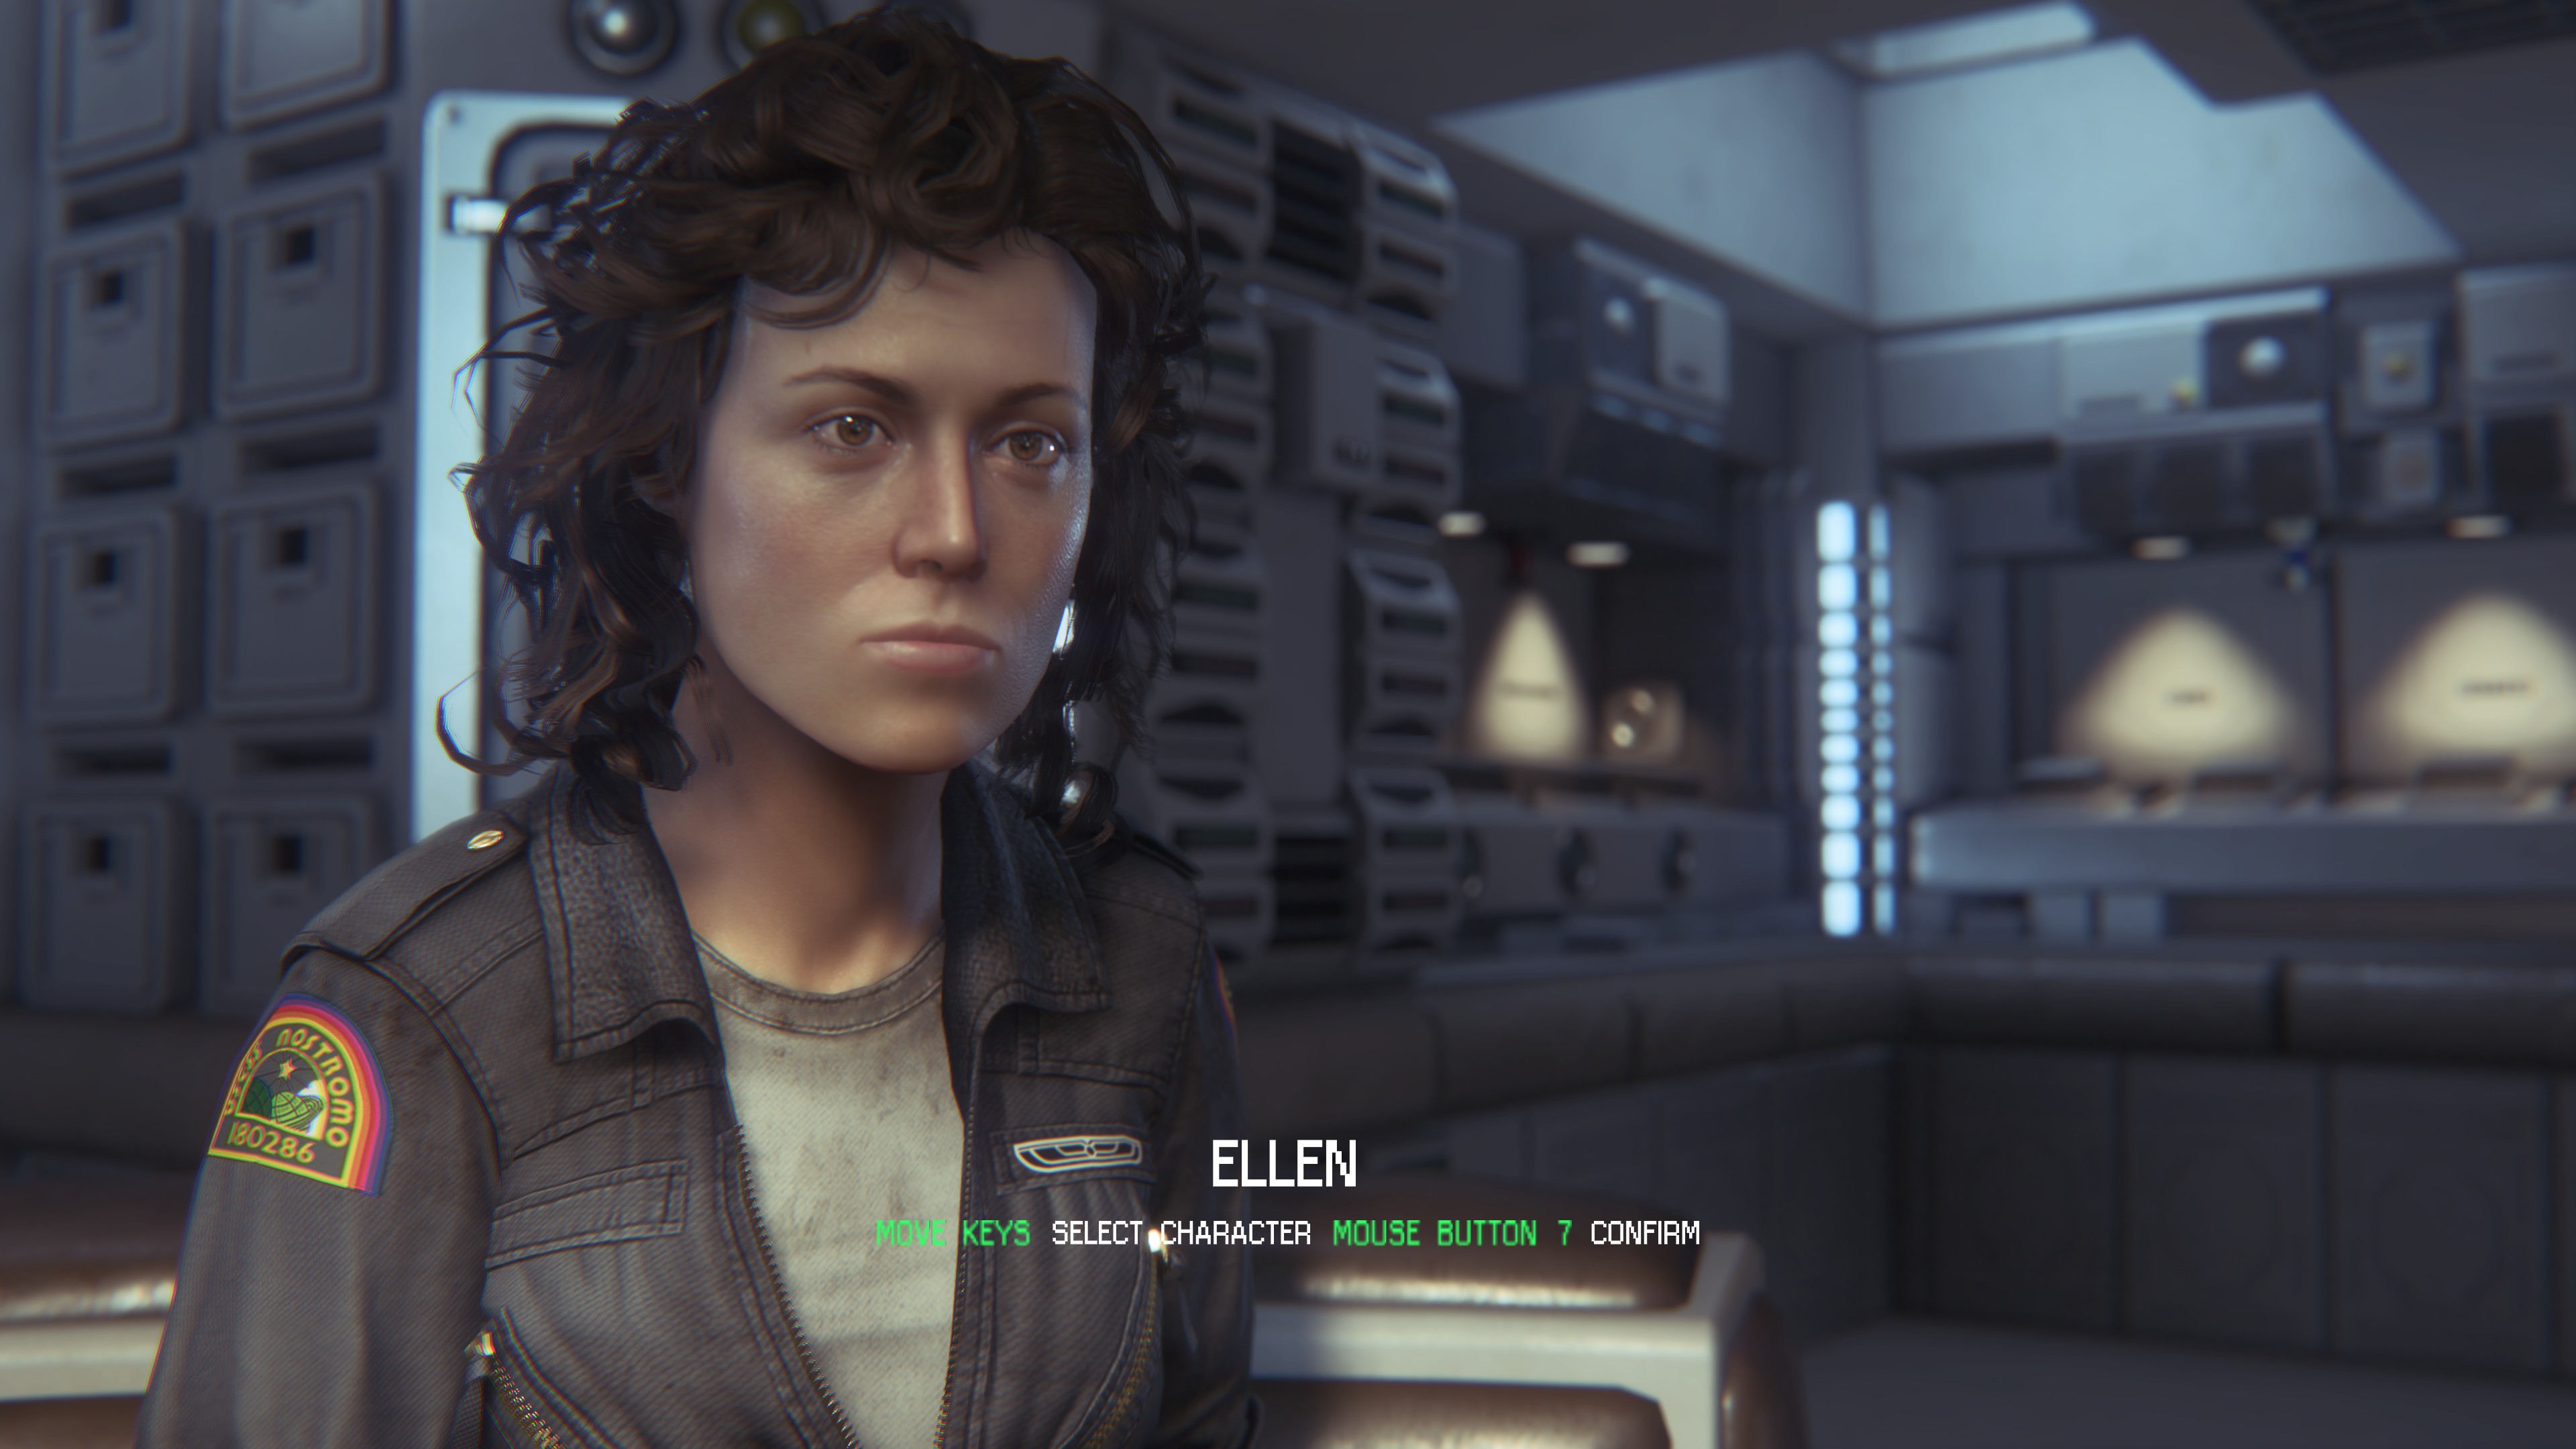 cepillo cuota de matrícula llave inglesa Reddit users re-enable Alien: Isolation's VR mode with unofficial patch |  Ars Technica